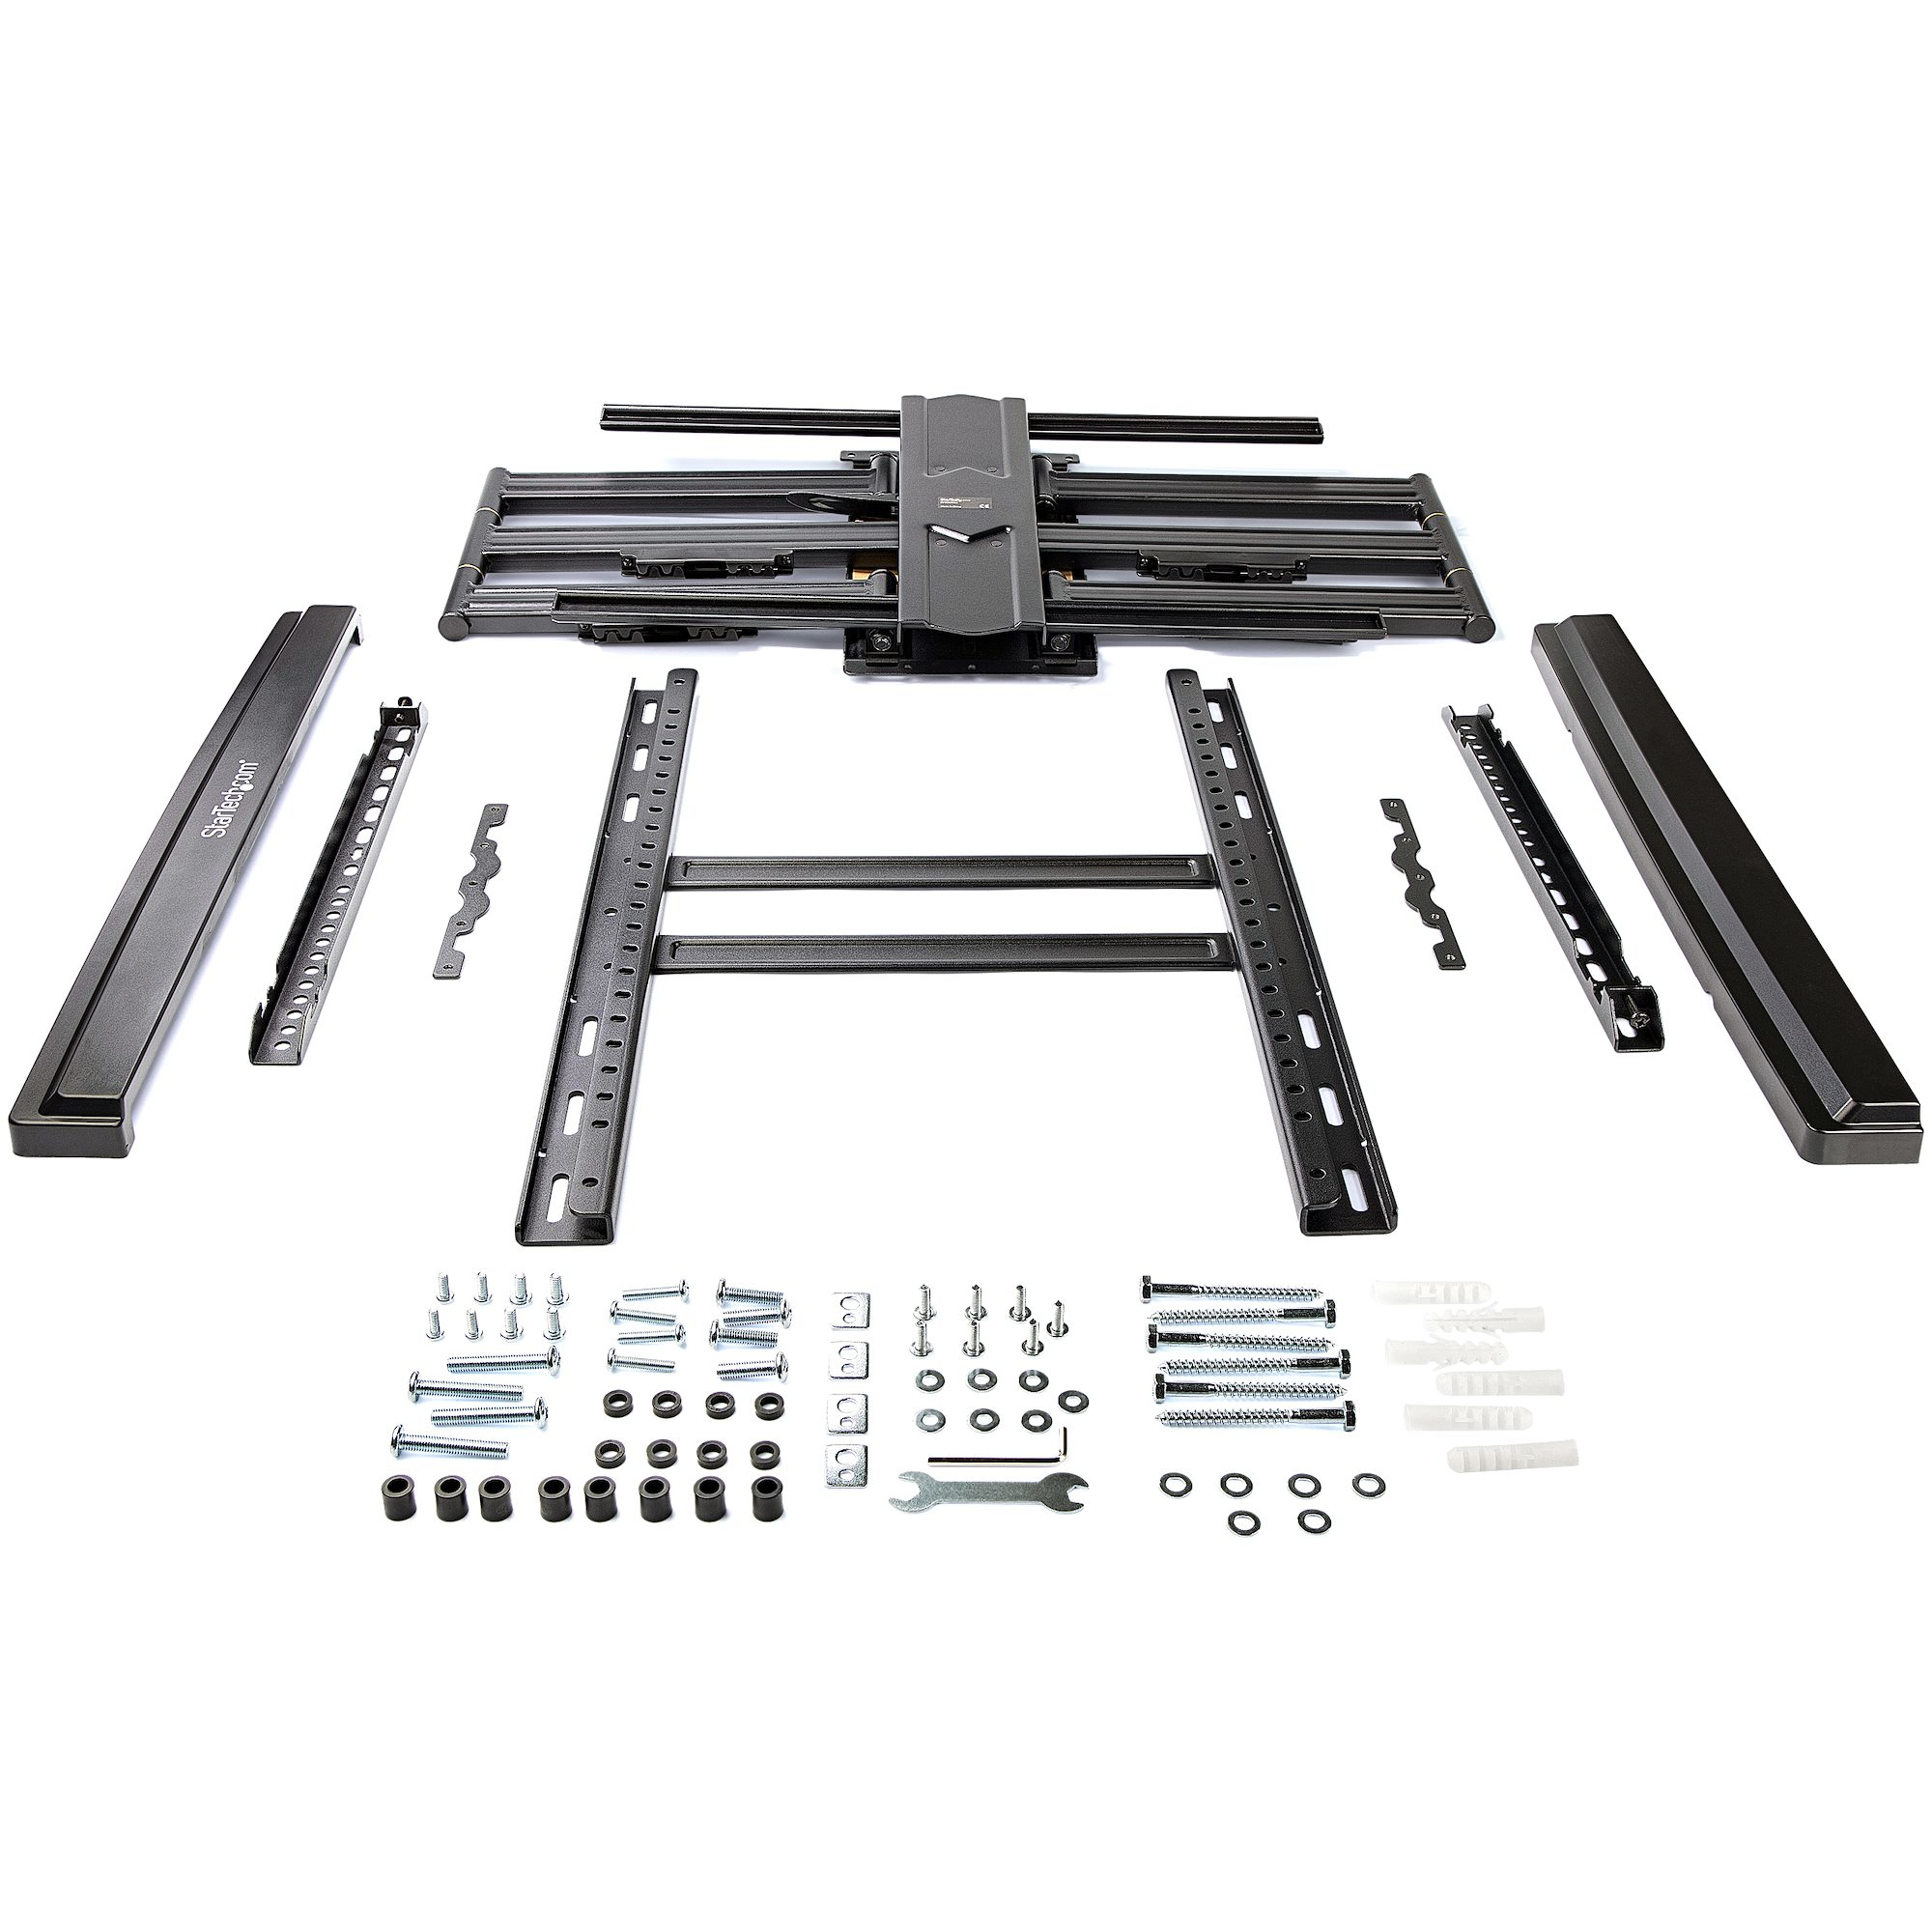 StarTech.com TV Wall Mount supports up to 100 inch VESA Displays, Low Profile Full Motion TV Wall Mount for Large Displays, Heavy Duty Adjustable Tilt/Swivel Articulating Arm Bracket - Cable Management (FPWARTS2)